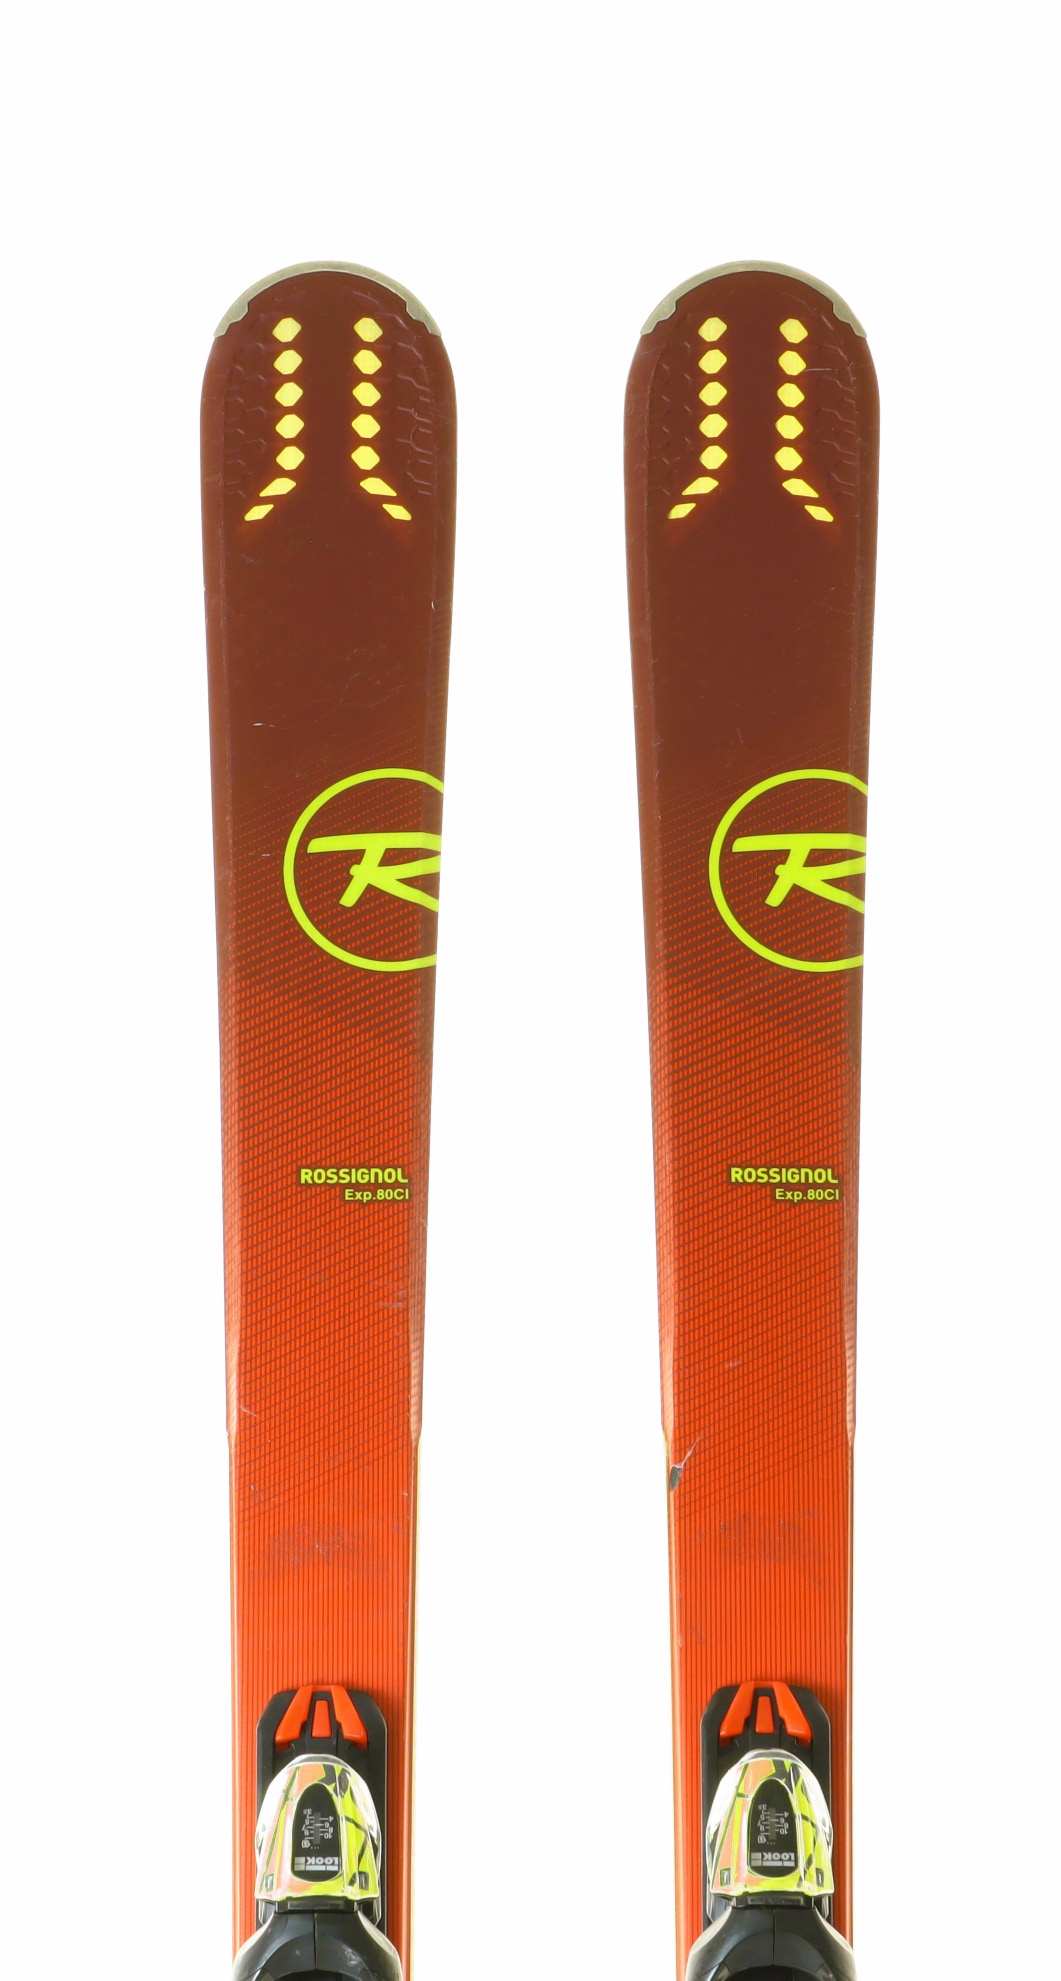 Used 2020 Rossignol Experience 80 CI Ski with Look Xpress 11 bindings, Size 174 (Option 230174) 2